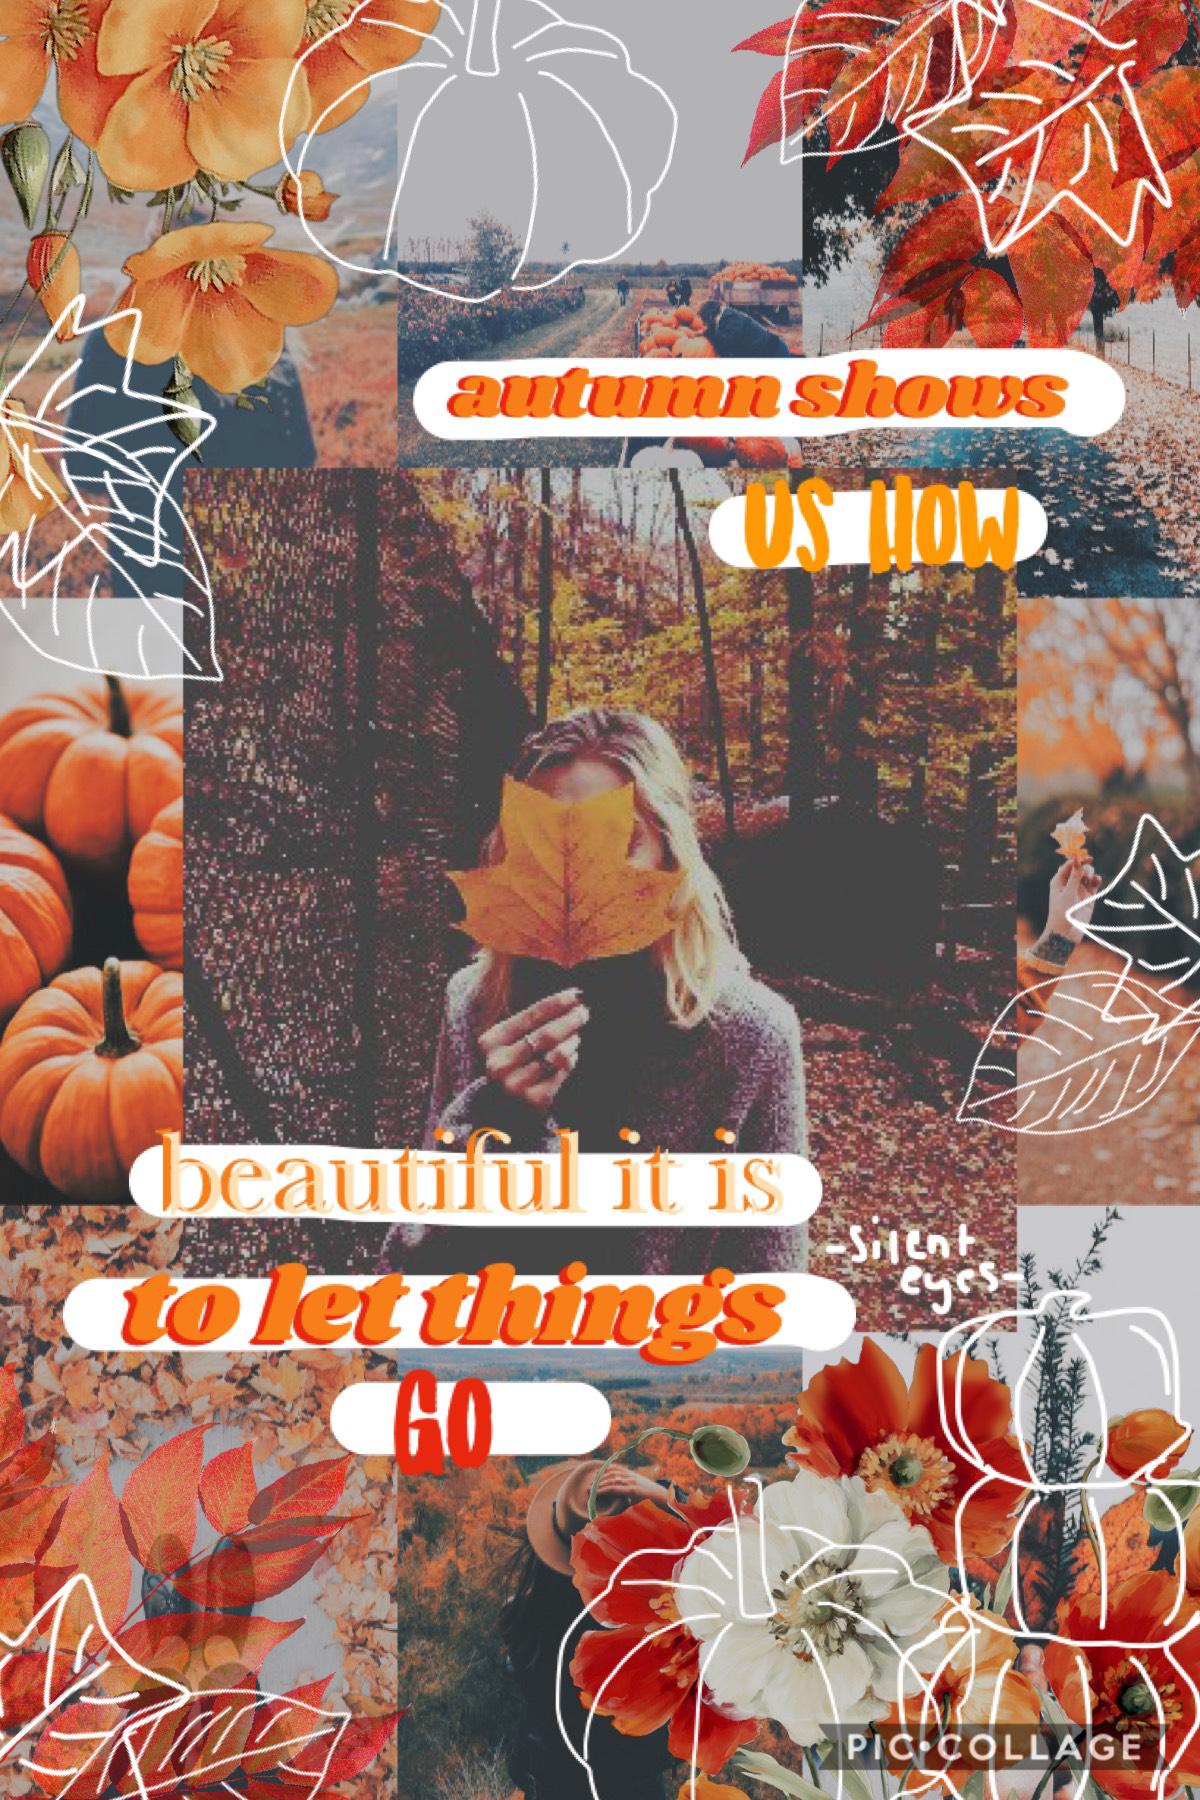 ╰☆☆ 𝕥𝕒𝕡 ☆☆╮
hi again! 2 edits in a day lol that never happens for me. Well happy autumn i think. I tried a new style that i’ve seen floating around PC.
𝕢 𝕠 𝕥 𝕕: Favorite season
𝕒 𝕠 𝕥 𝕕: definitely fall, i love wearing sweaters and i love the weather